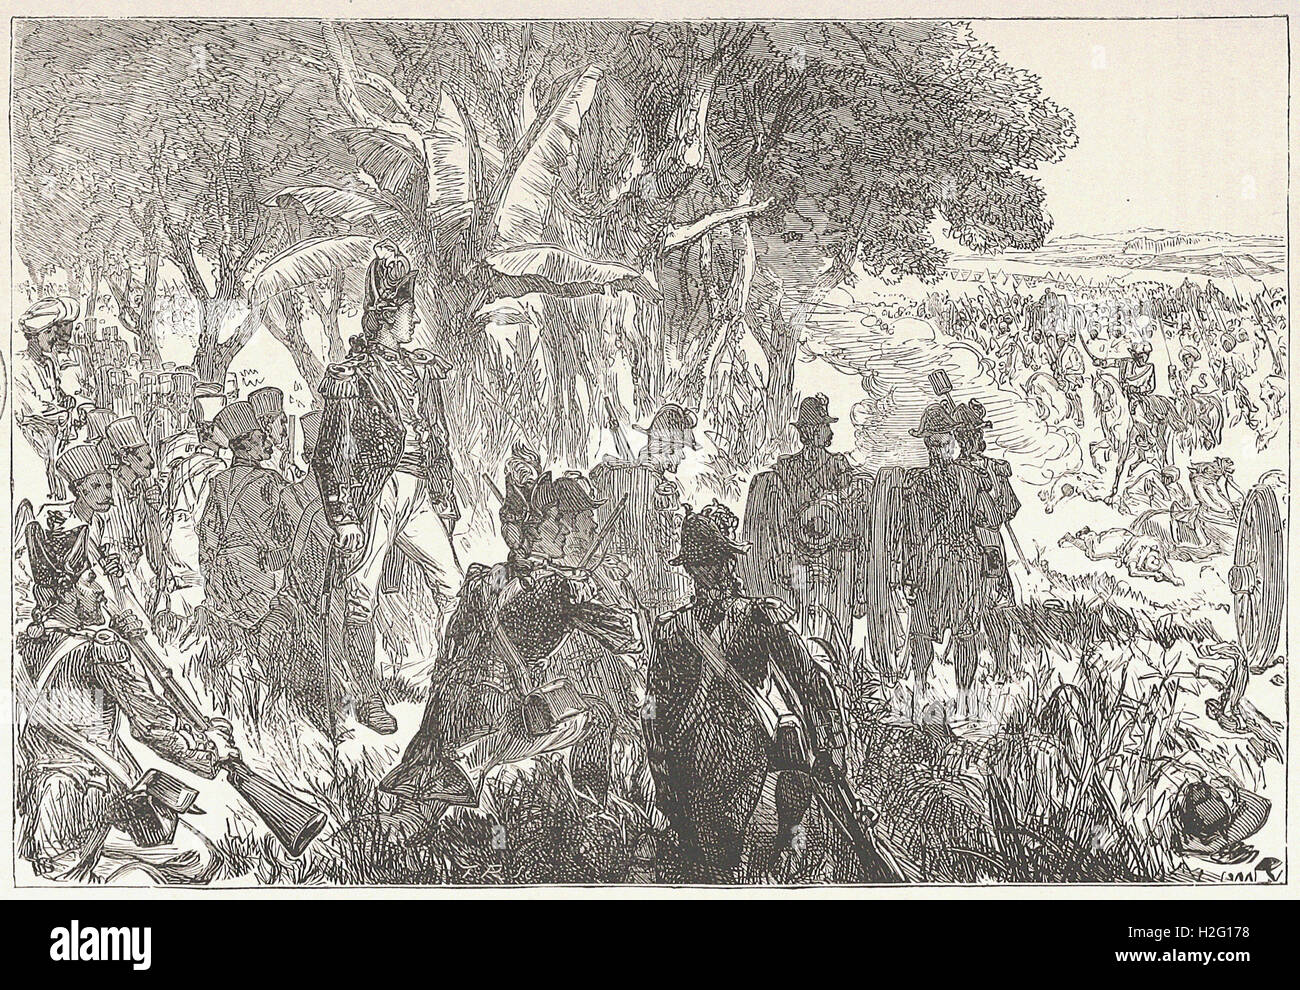 THE BATTLE OF PLASSEY - from 'Cassell's Illustrated Universal History' - 1882 Stock Photo